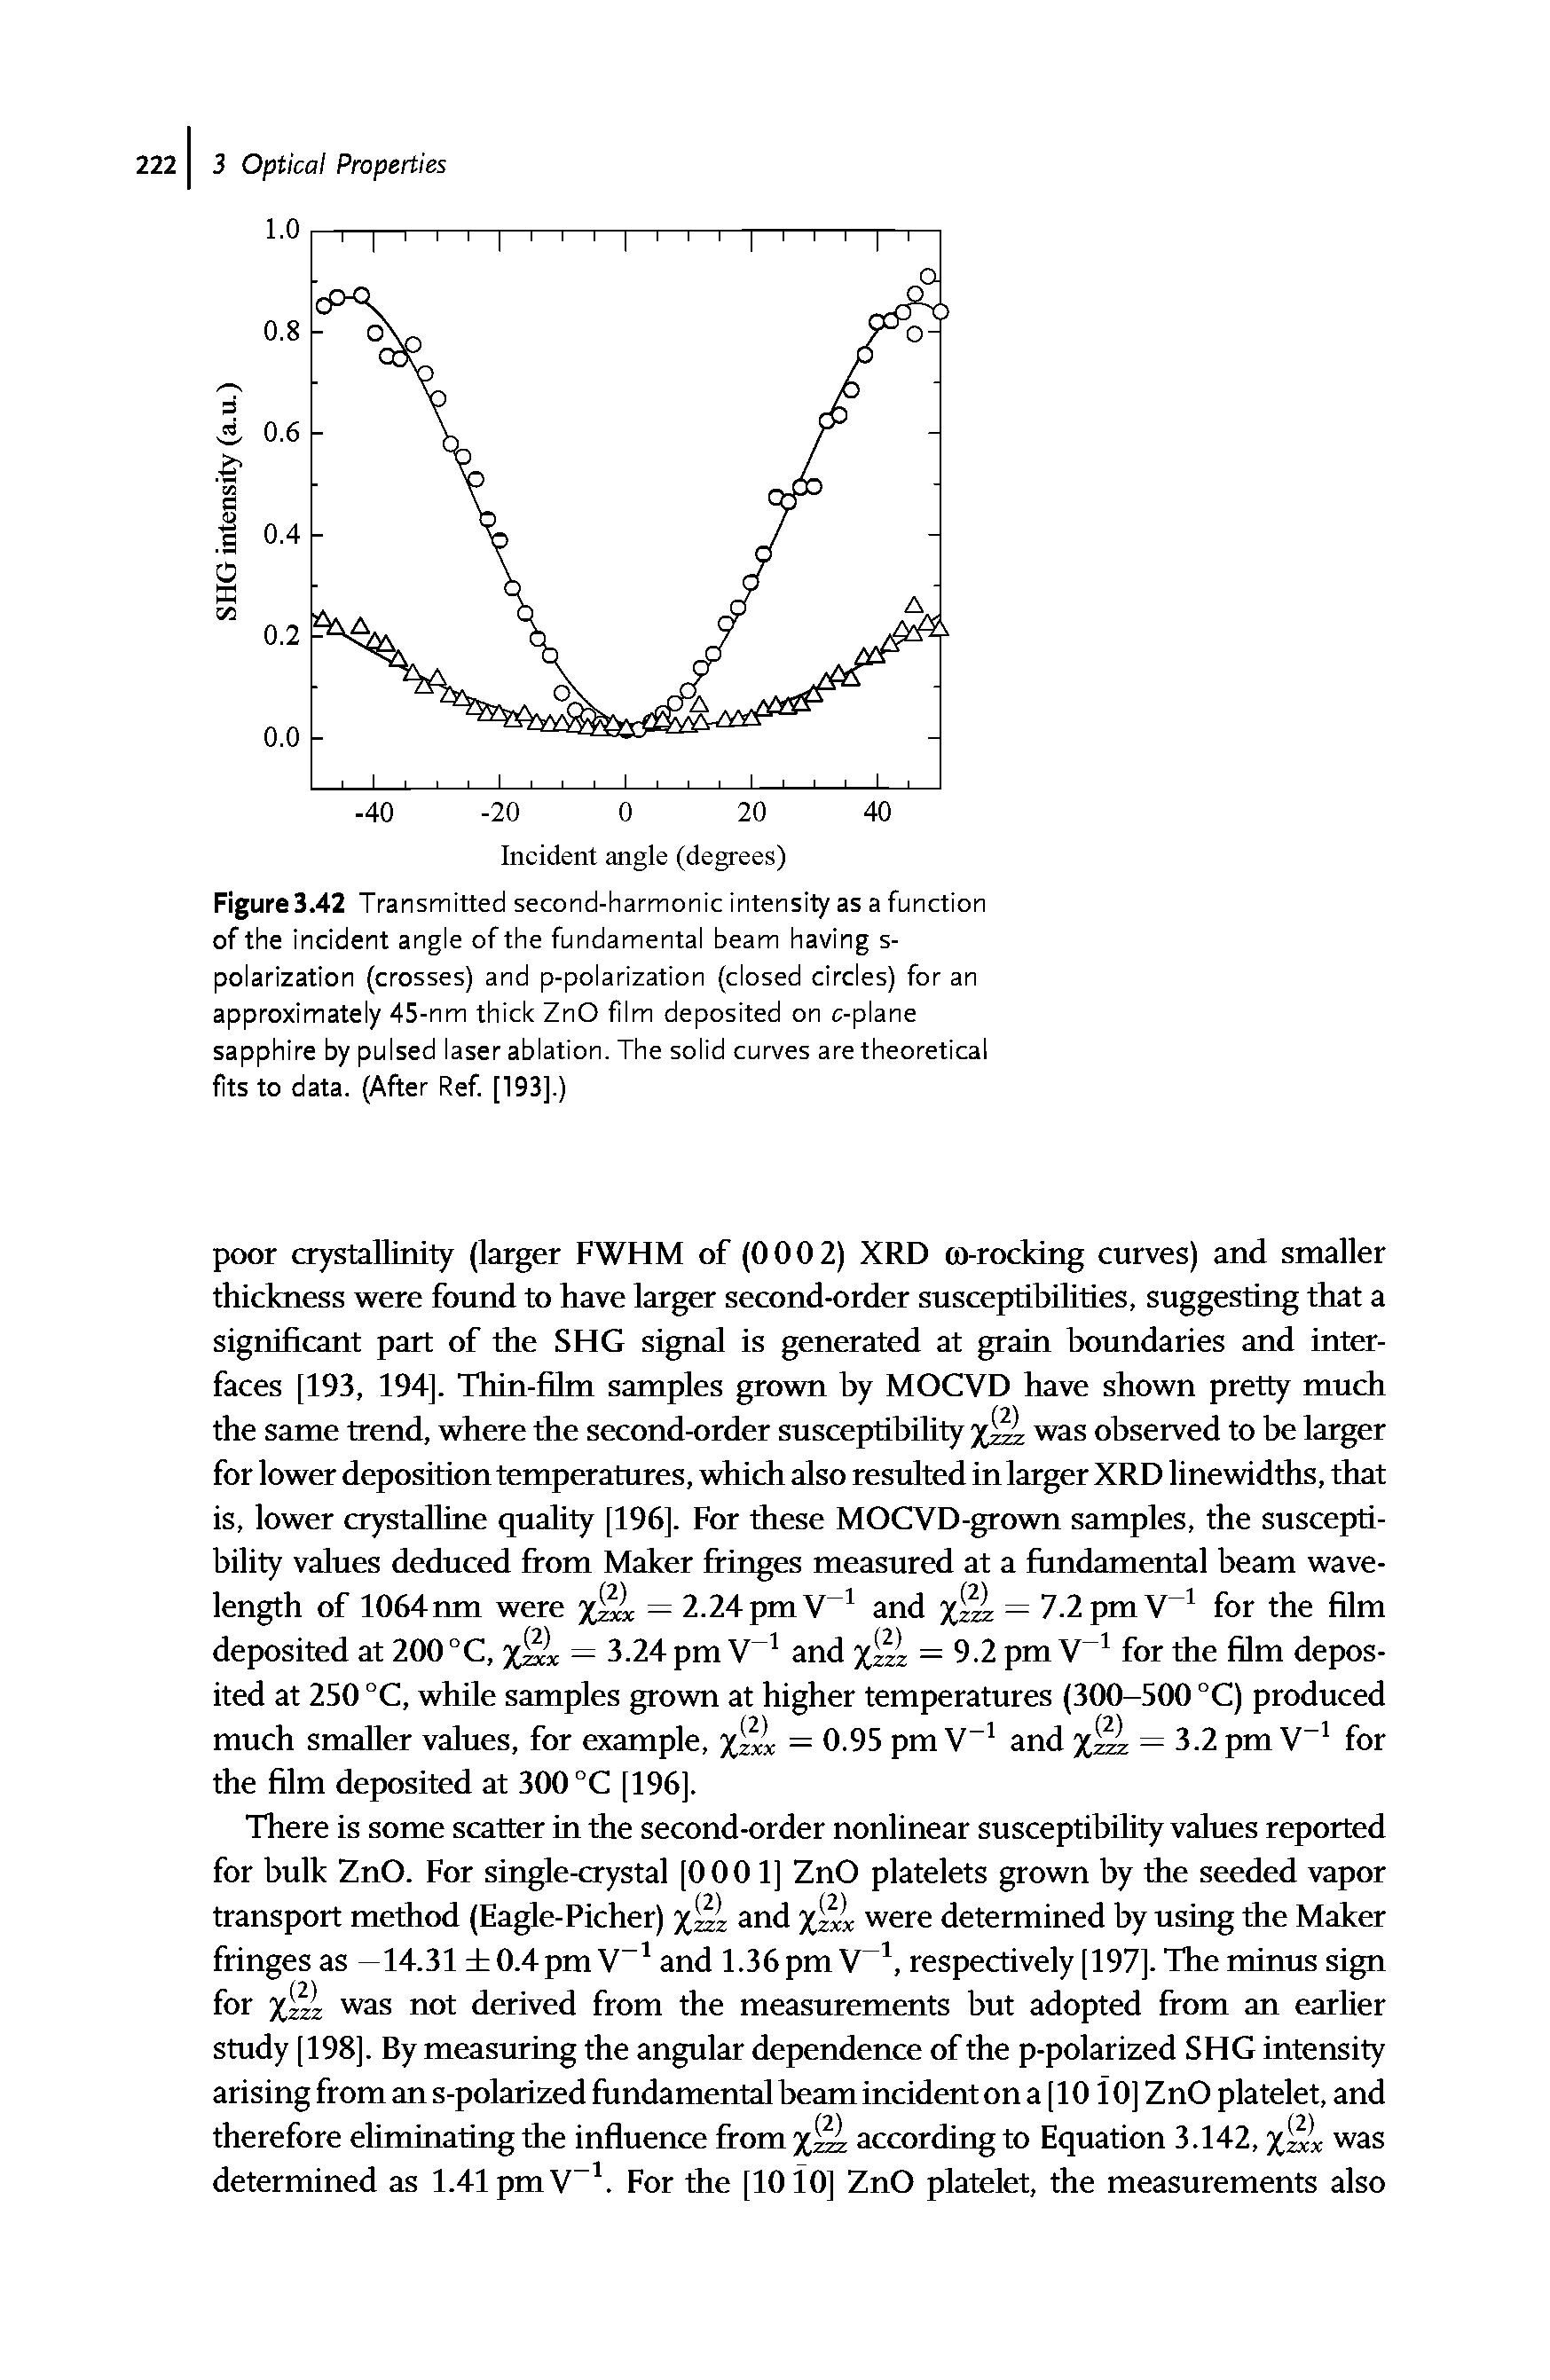 Figure3.42 Transmitted second-harmonic intensity as a function of the incident angle of the fundamental beam having s-polarization (crosses) and p-polarization (closed circles) for an approximately 45-nm thick ZnO film deposited on c-plane sapphire by pulsed laser ablation. The solid curves are theoretical fits to data. (After Ref [193].)...